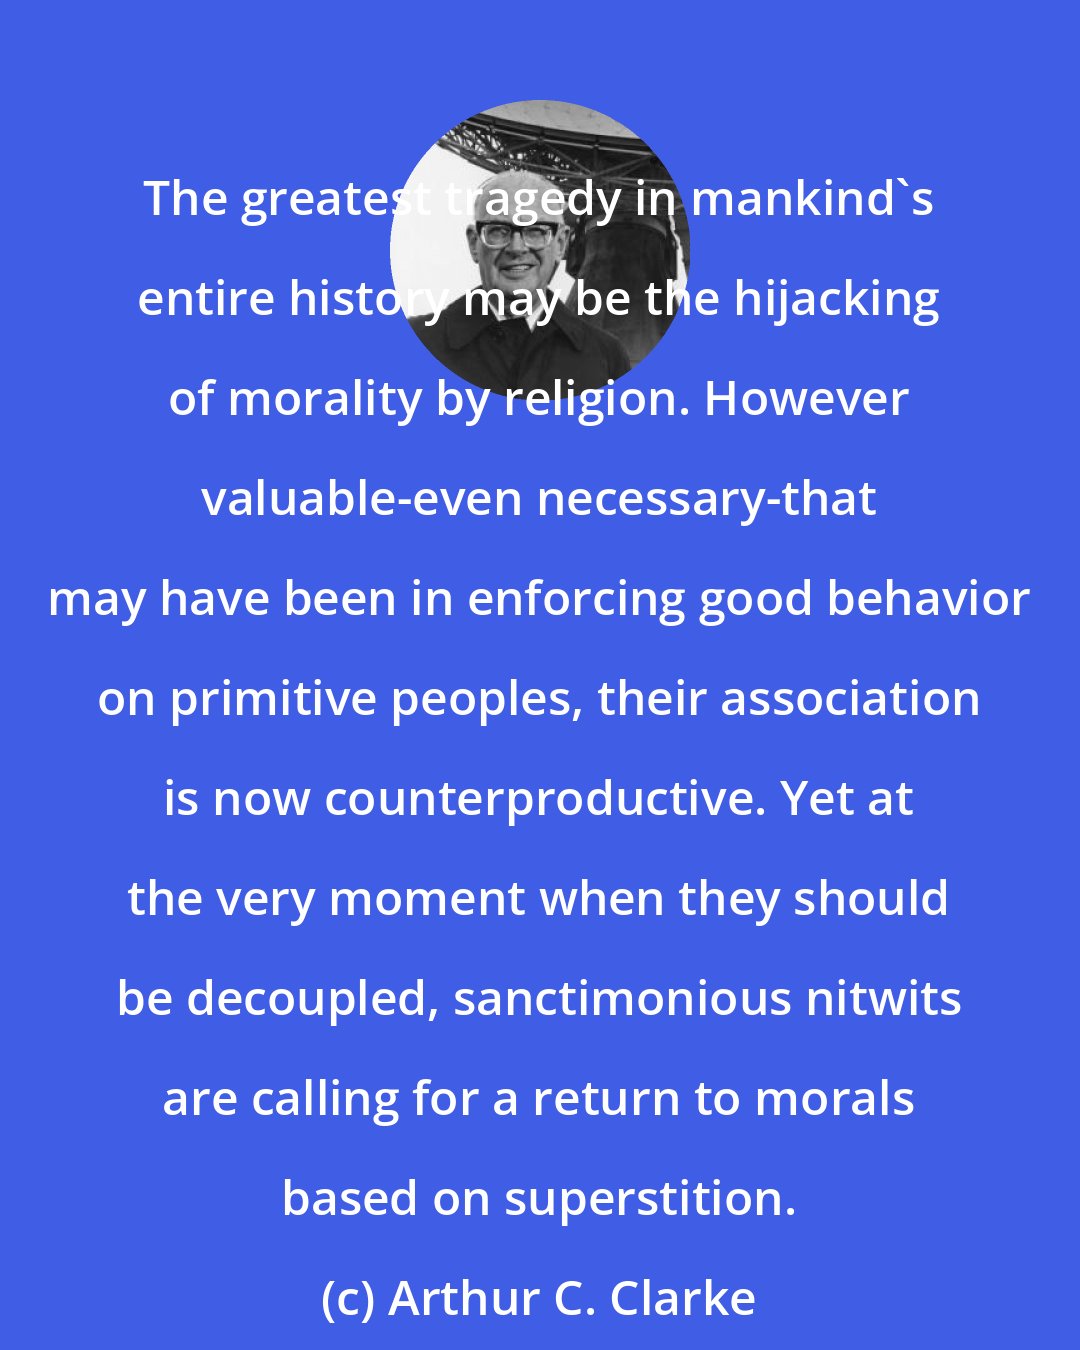 Arthur C. Clarke: The greatest tragedy in mankind's entire history may be the hijacking of morality by religion. However valuable-even necessary-that may have been in enforcing good behavior on primitive peoples, their association is now counterproductive. Yet at the very moment when they should be decoupled, sanctimonious nitwits are calling for a return to morals based on superstition.